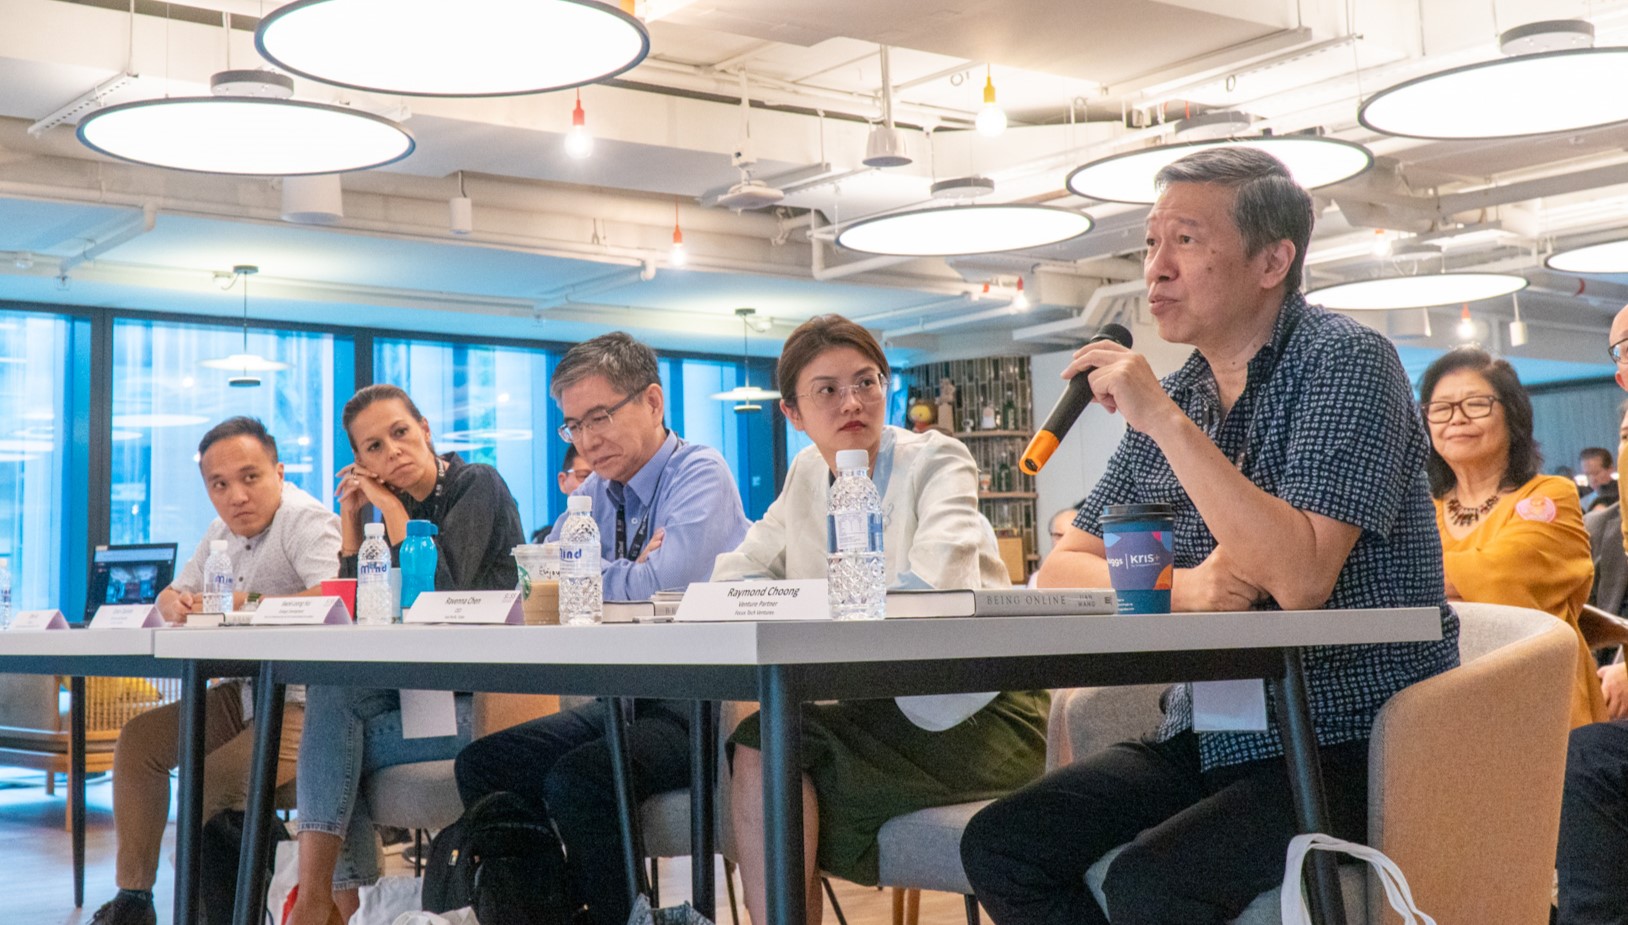 The judges providing valuable feedback and guidance to the participating startups (from left to right Chris Tan, Grace Clapham, Kwok Leong Hui, Ravenna Chen, and Raymond Choong).